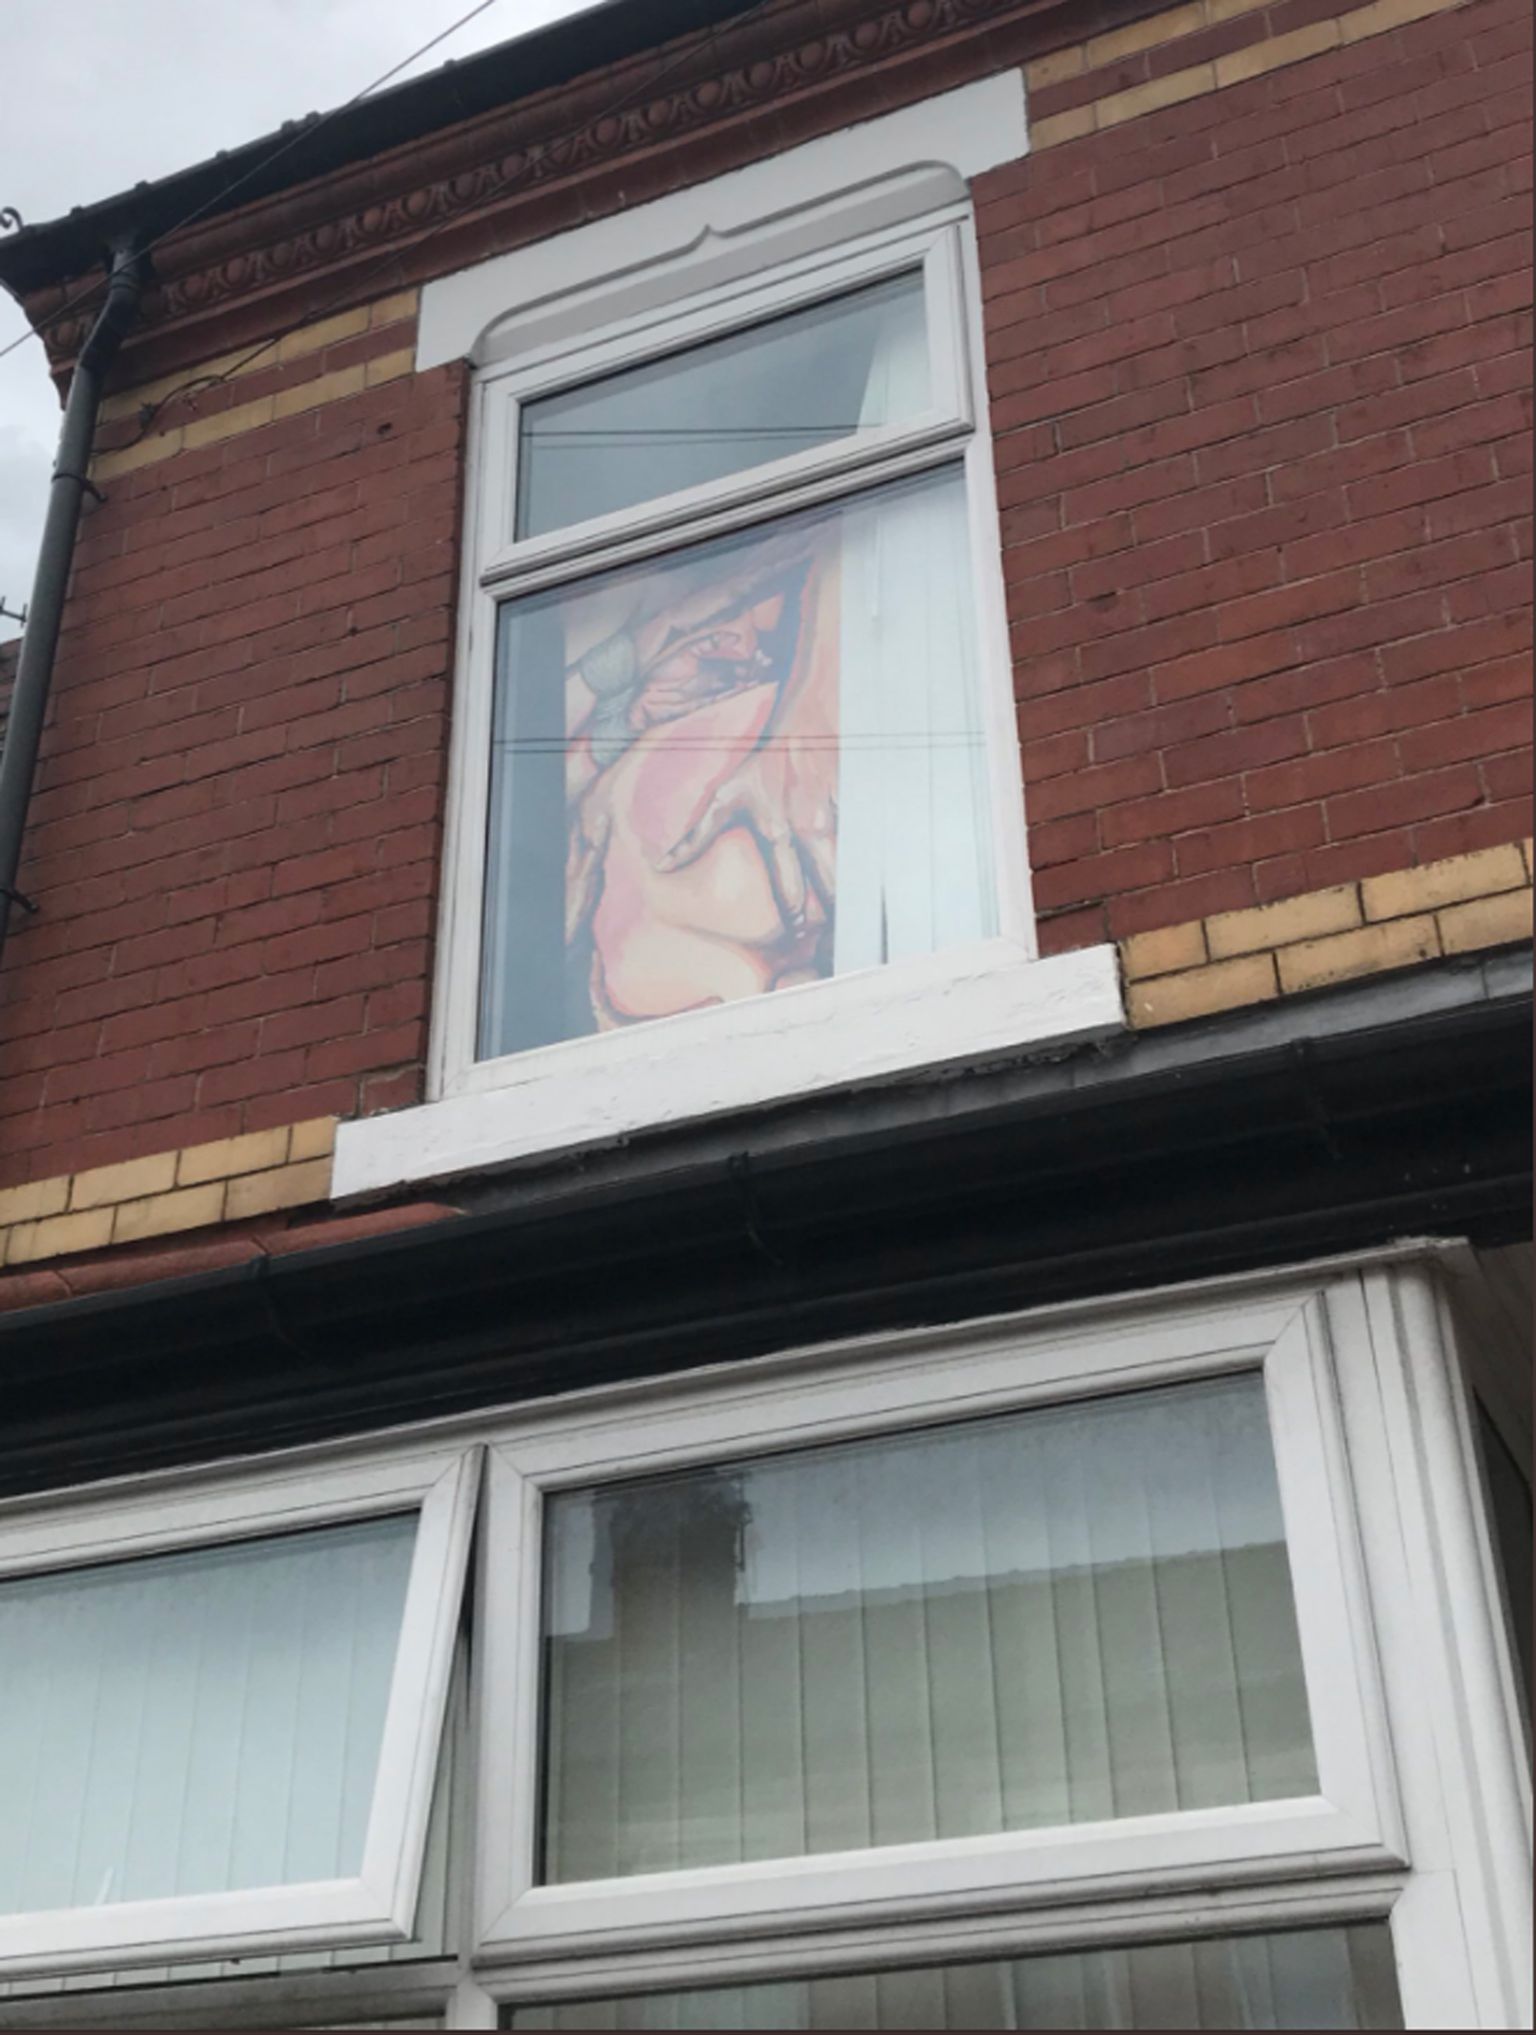 PIC FROM Caters News - (PICTURED: The pornographic painting up against ,Lucy Briscoe-Rimmers window in Salford, Manchester) - A festival go-er accidentally left a deeply offensive pornographic painting up against her window  leading to her entire street complaining about the phallic drawing.Lucy Briscoe-Rimmer, 20, a Visual Arts student painted Double an*l penetration as part of her second year project on pornography in art  but accidentally left it up against her window whilst she was at Boomtown festival.SEE CATERS COPY